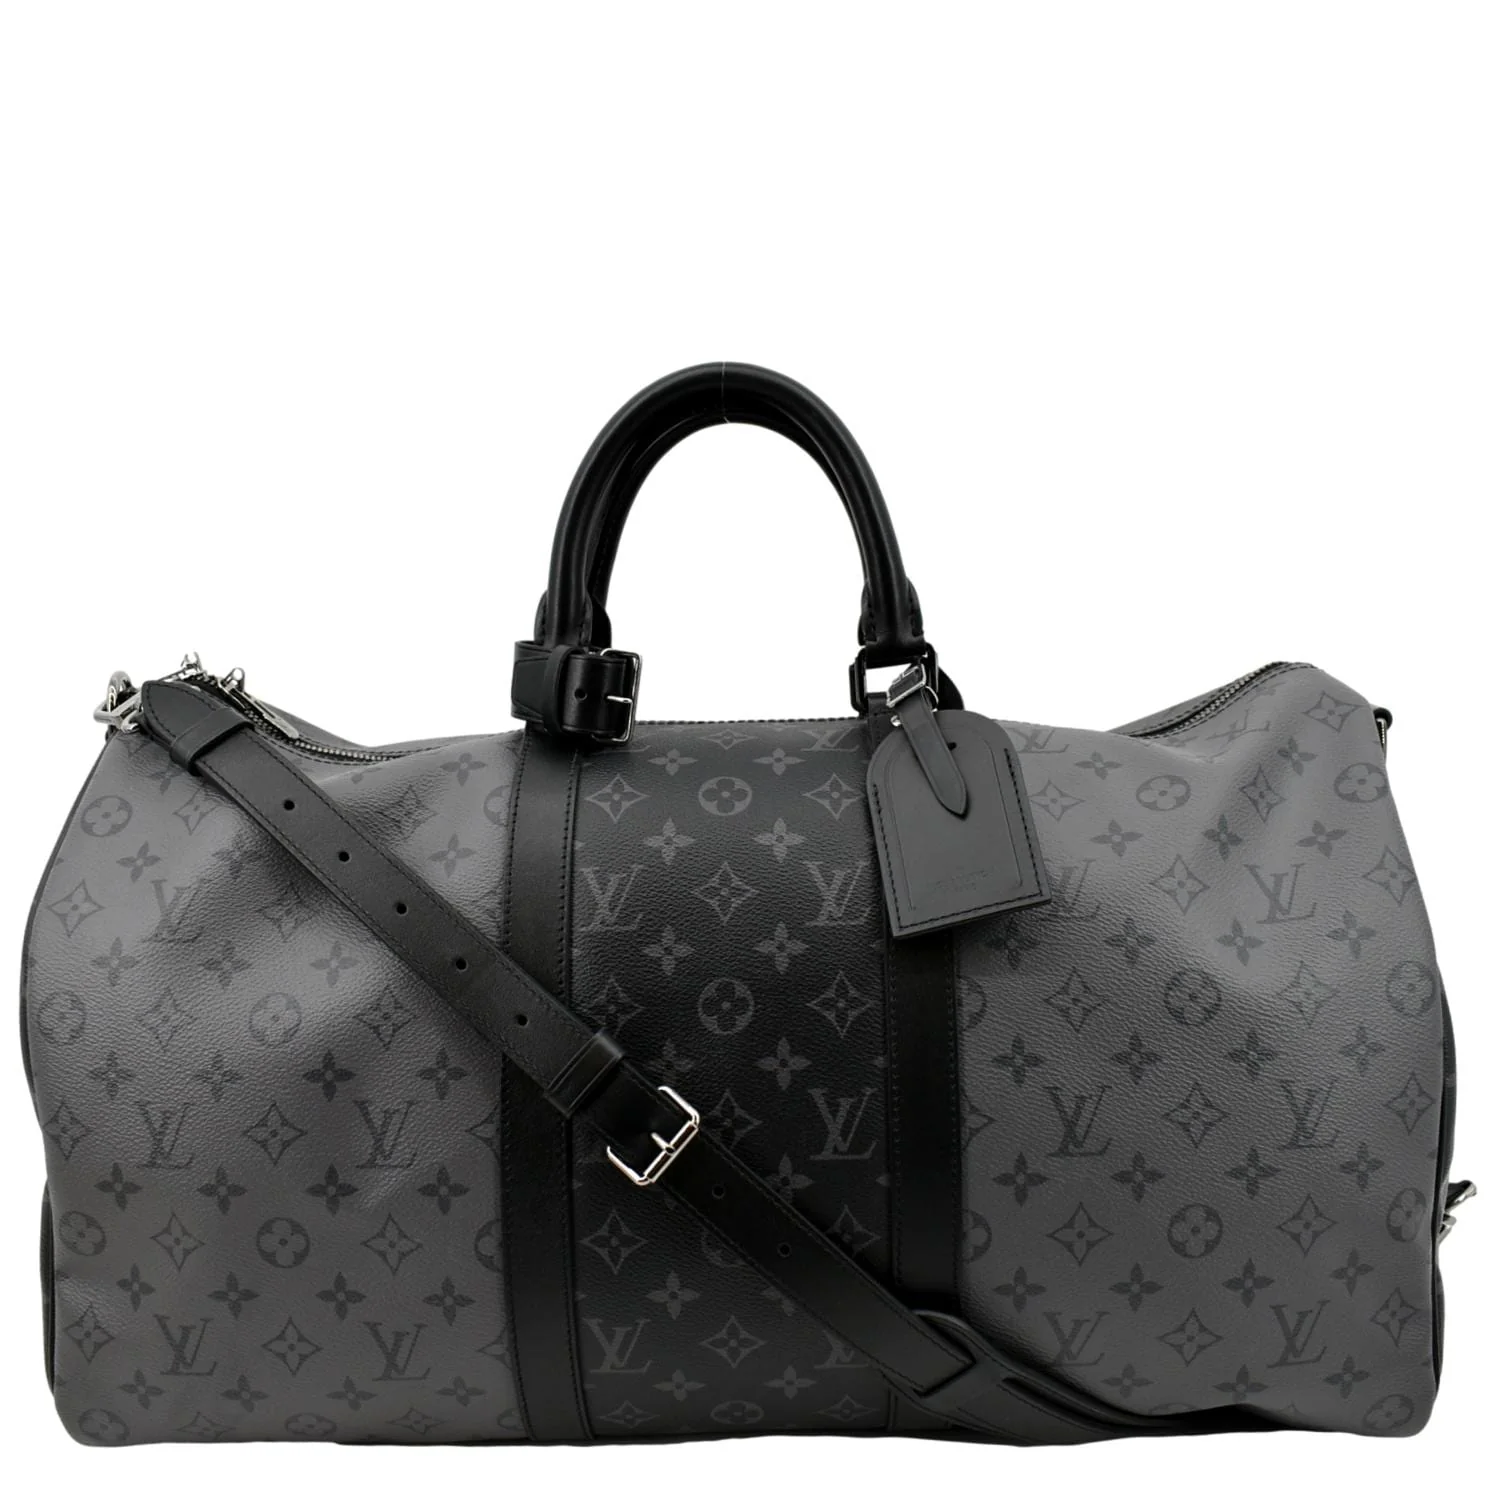 This new interpretation of the iconic Keepall is crafted in